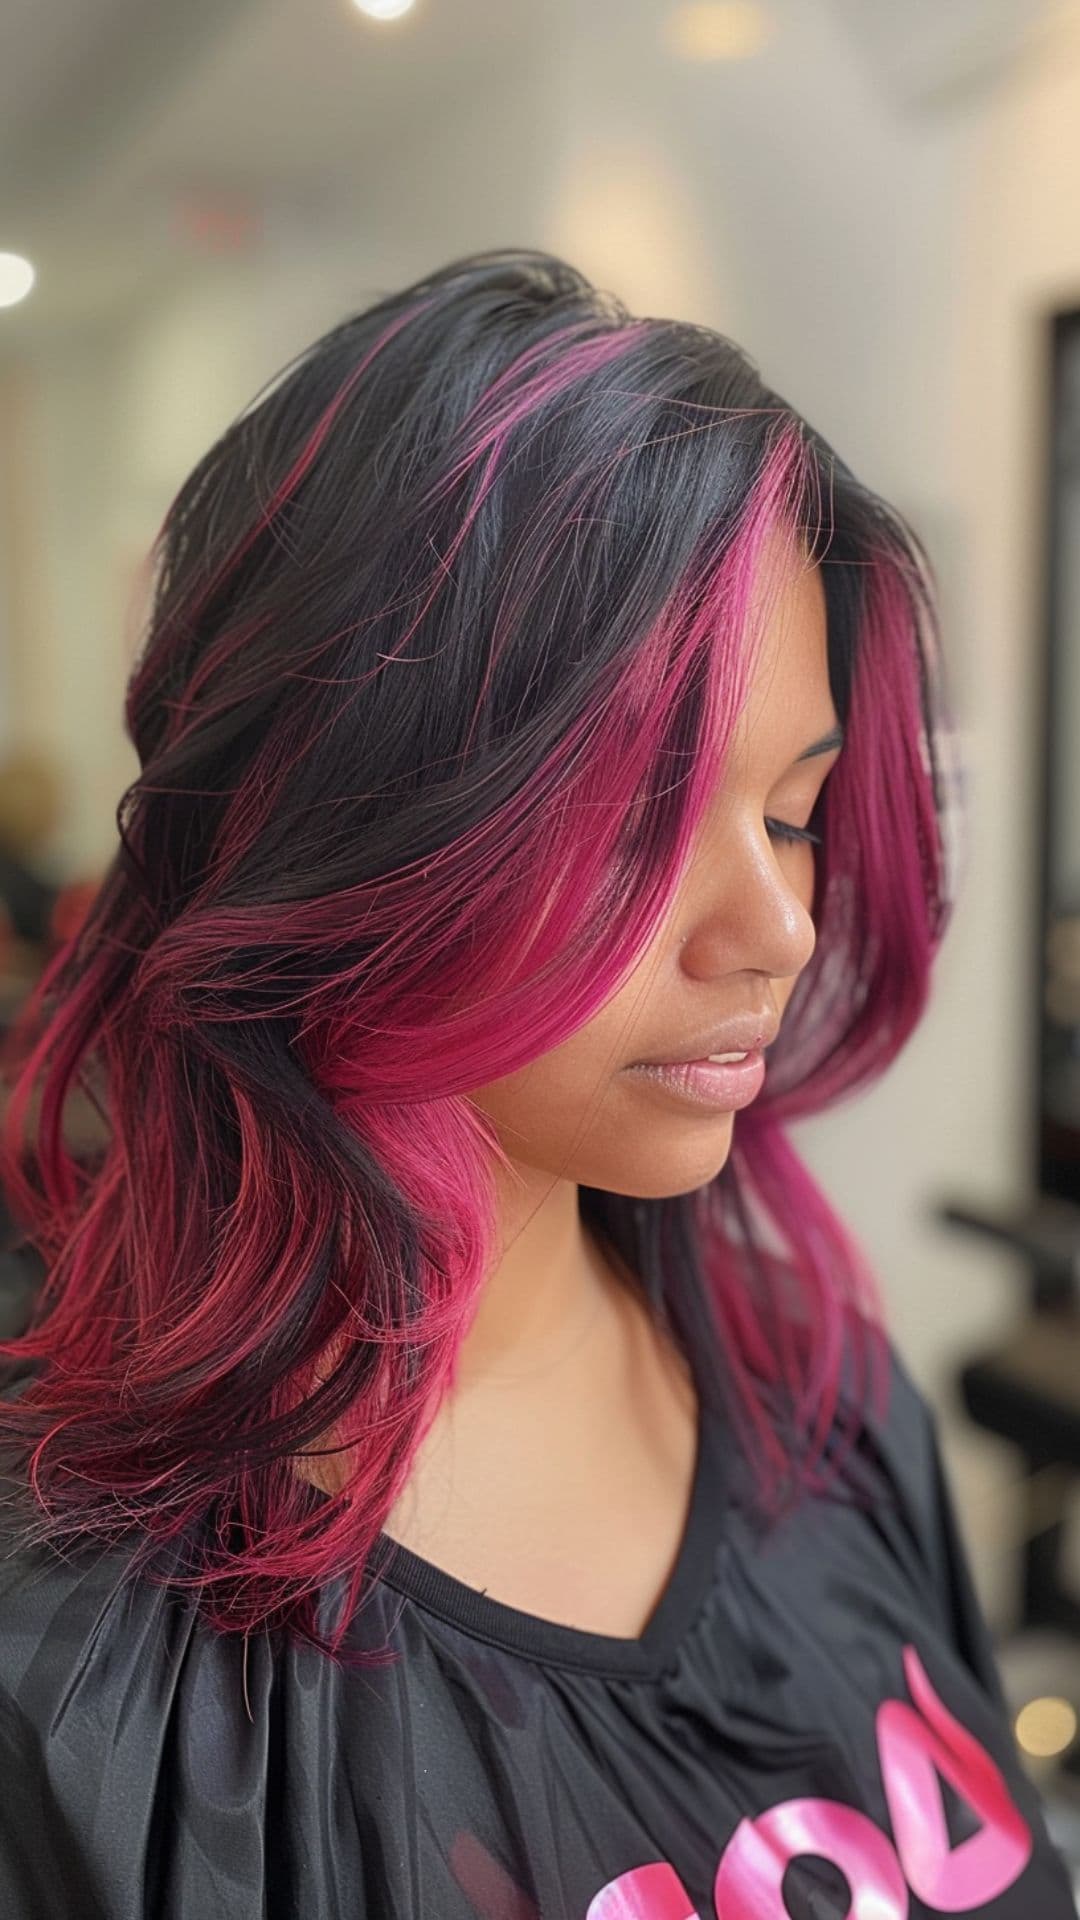 A woman modelling a black and magenta hair.